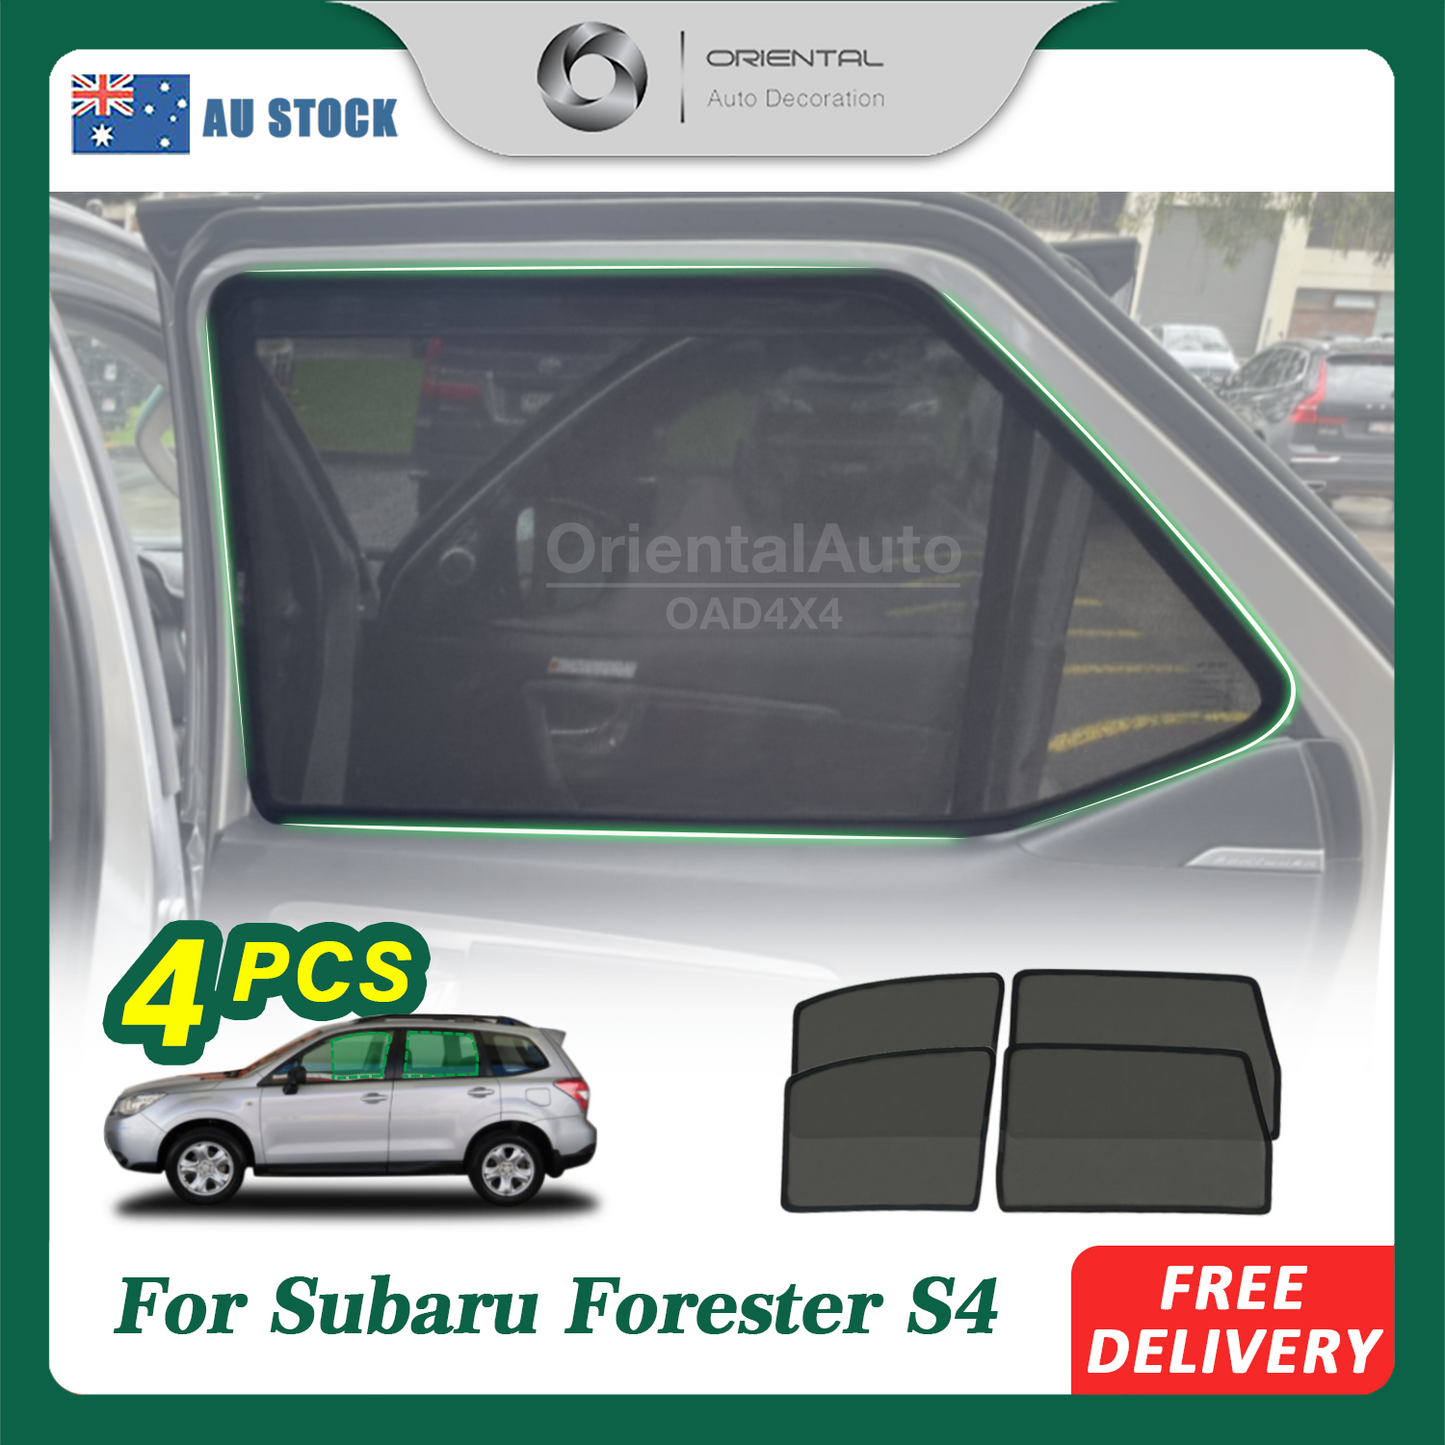 4PCS Magnetic Sun Shade for Subaru Forester S4 2013-2018 Window Sun Shades UV Protection Mesh Cover